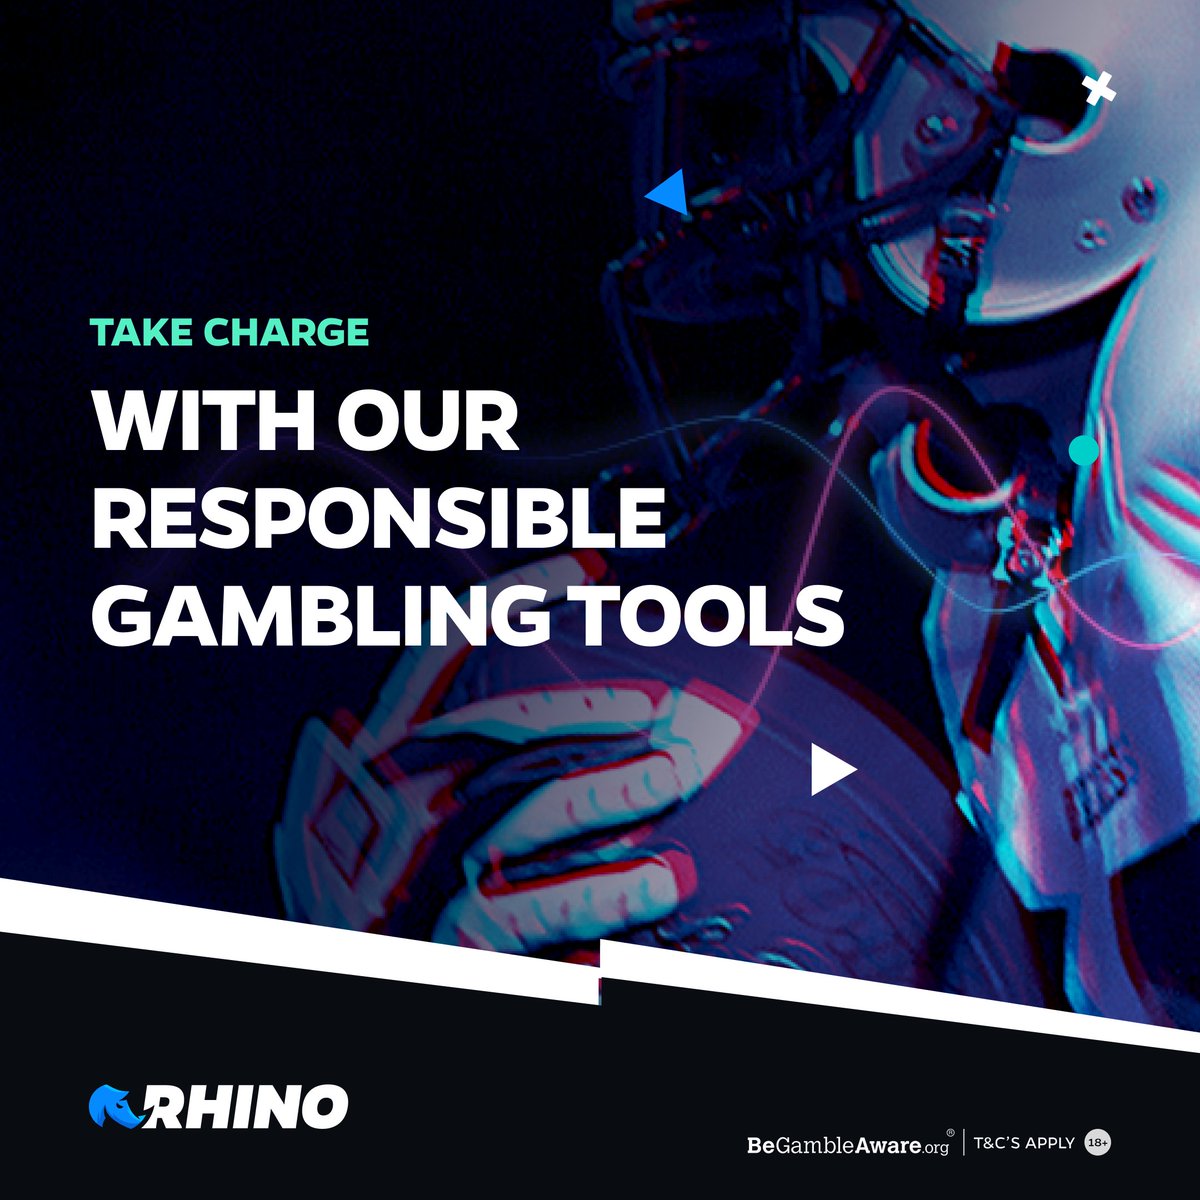 STAY IN CONTROL We've got tools that can help you gamble responsibly, including: - Daily, Weekly and Monthly Deposit Limits - Player Break and Self Exclusion - Reality Check More Info: bit.ly/3HgbV8N (18+ begambleaware.org)